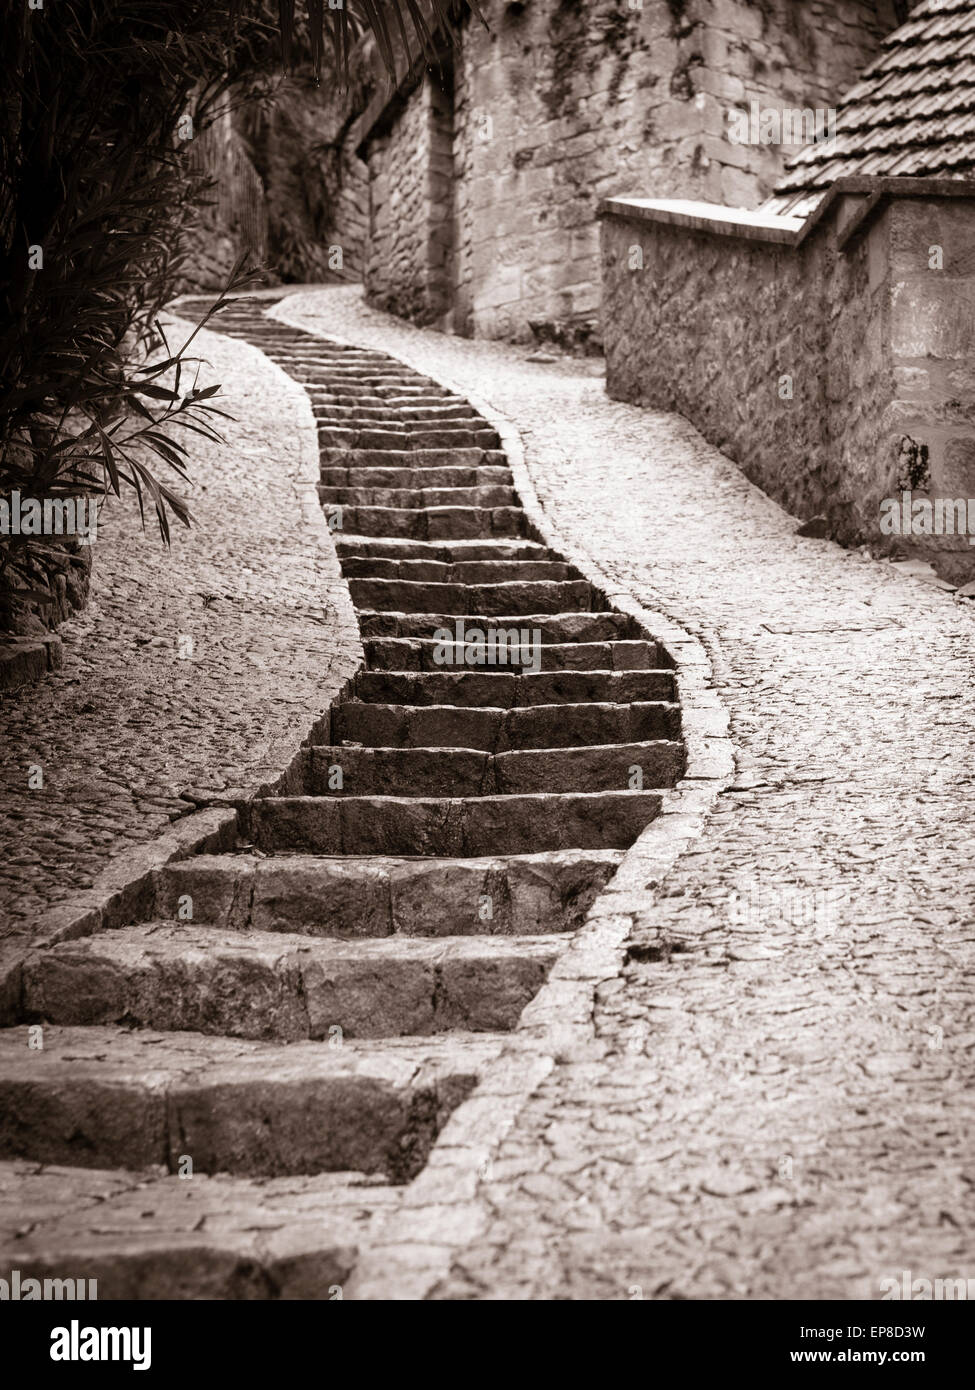 Winding stairs up La Roche, monochrome. Stone stairs make it easier to navigate the steep lanes in this cliff-side village. Stock Photo